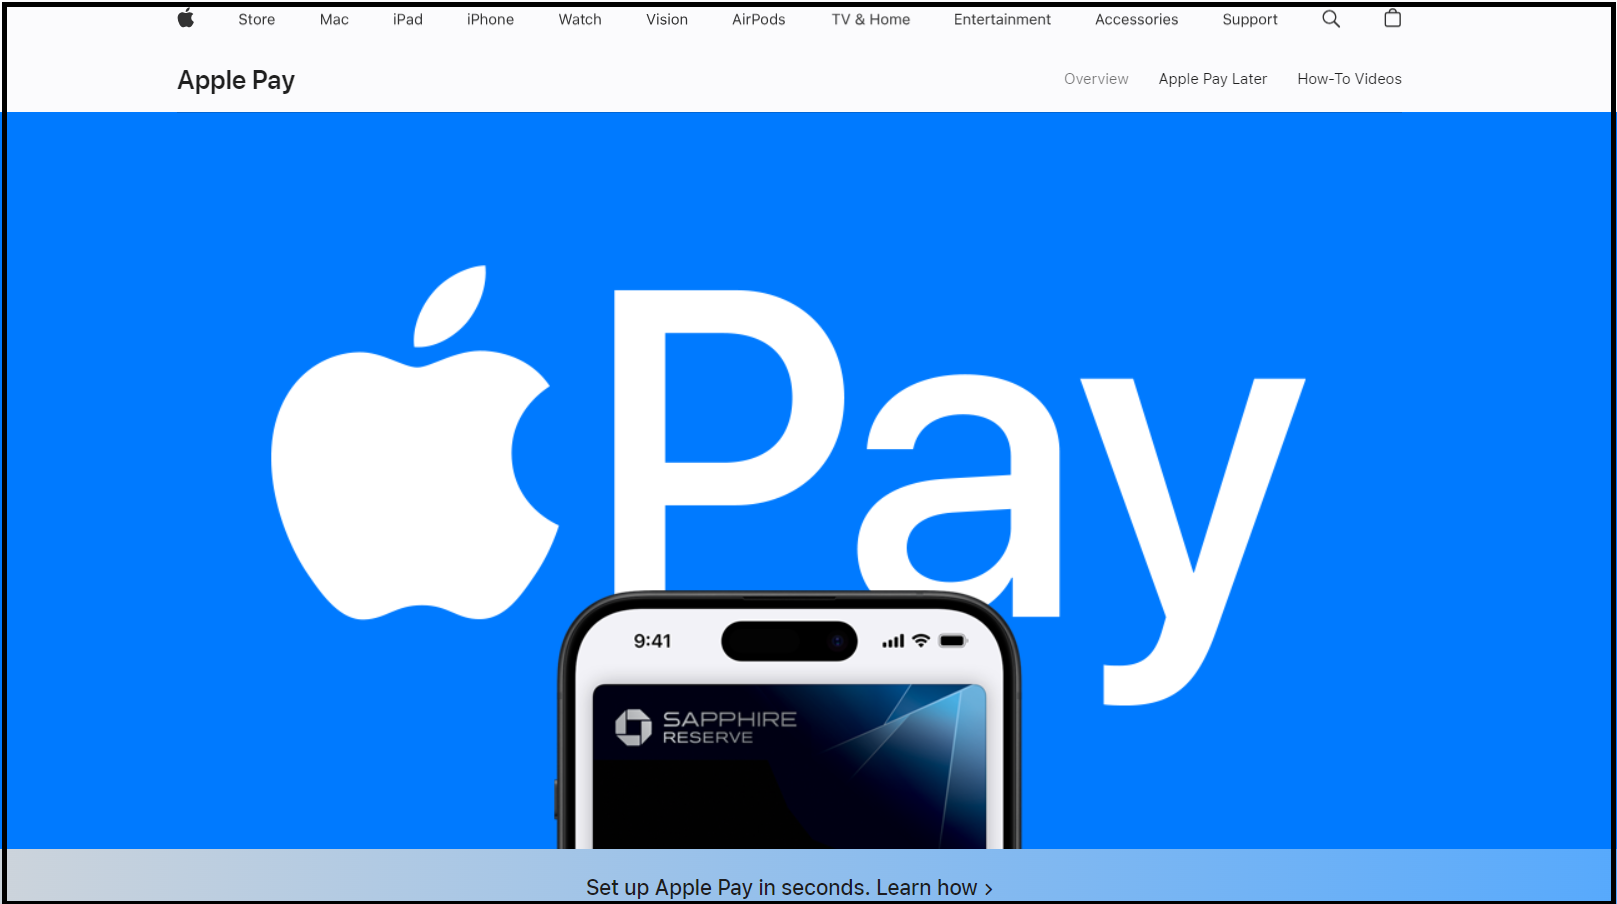 apple-pay-as-a-popular-digital-wallet-in-the-us